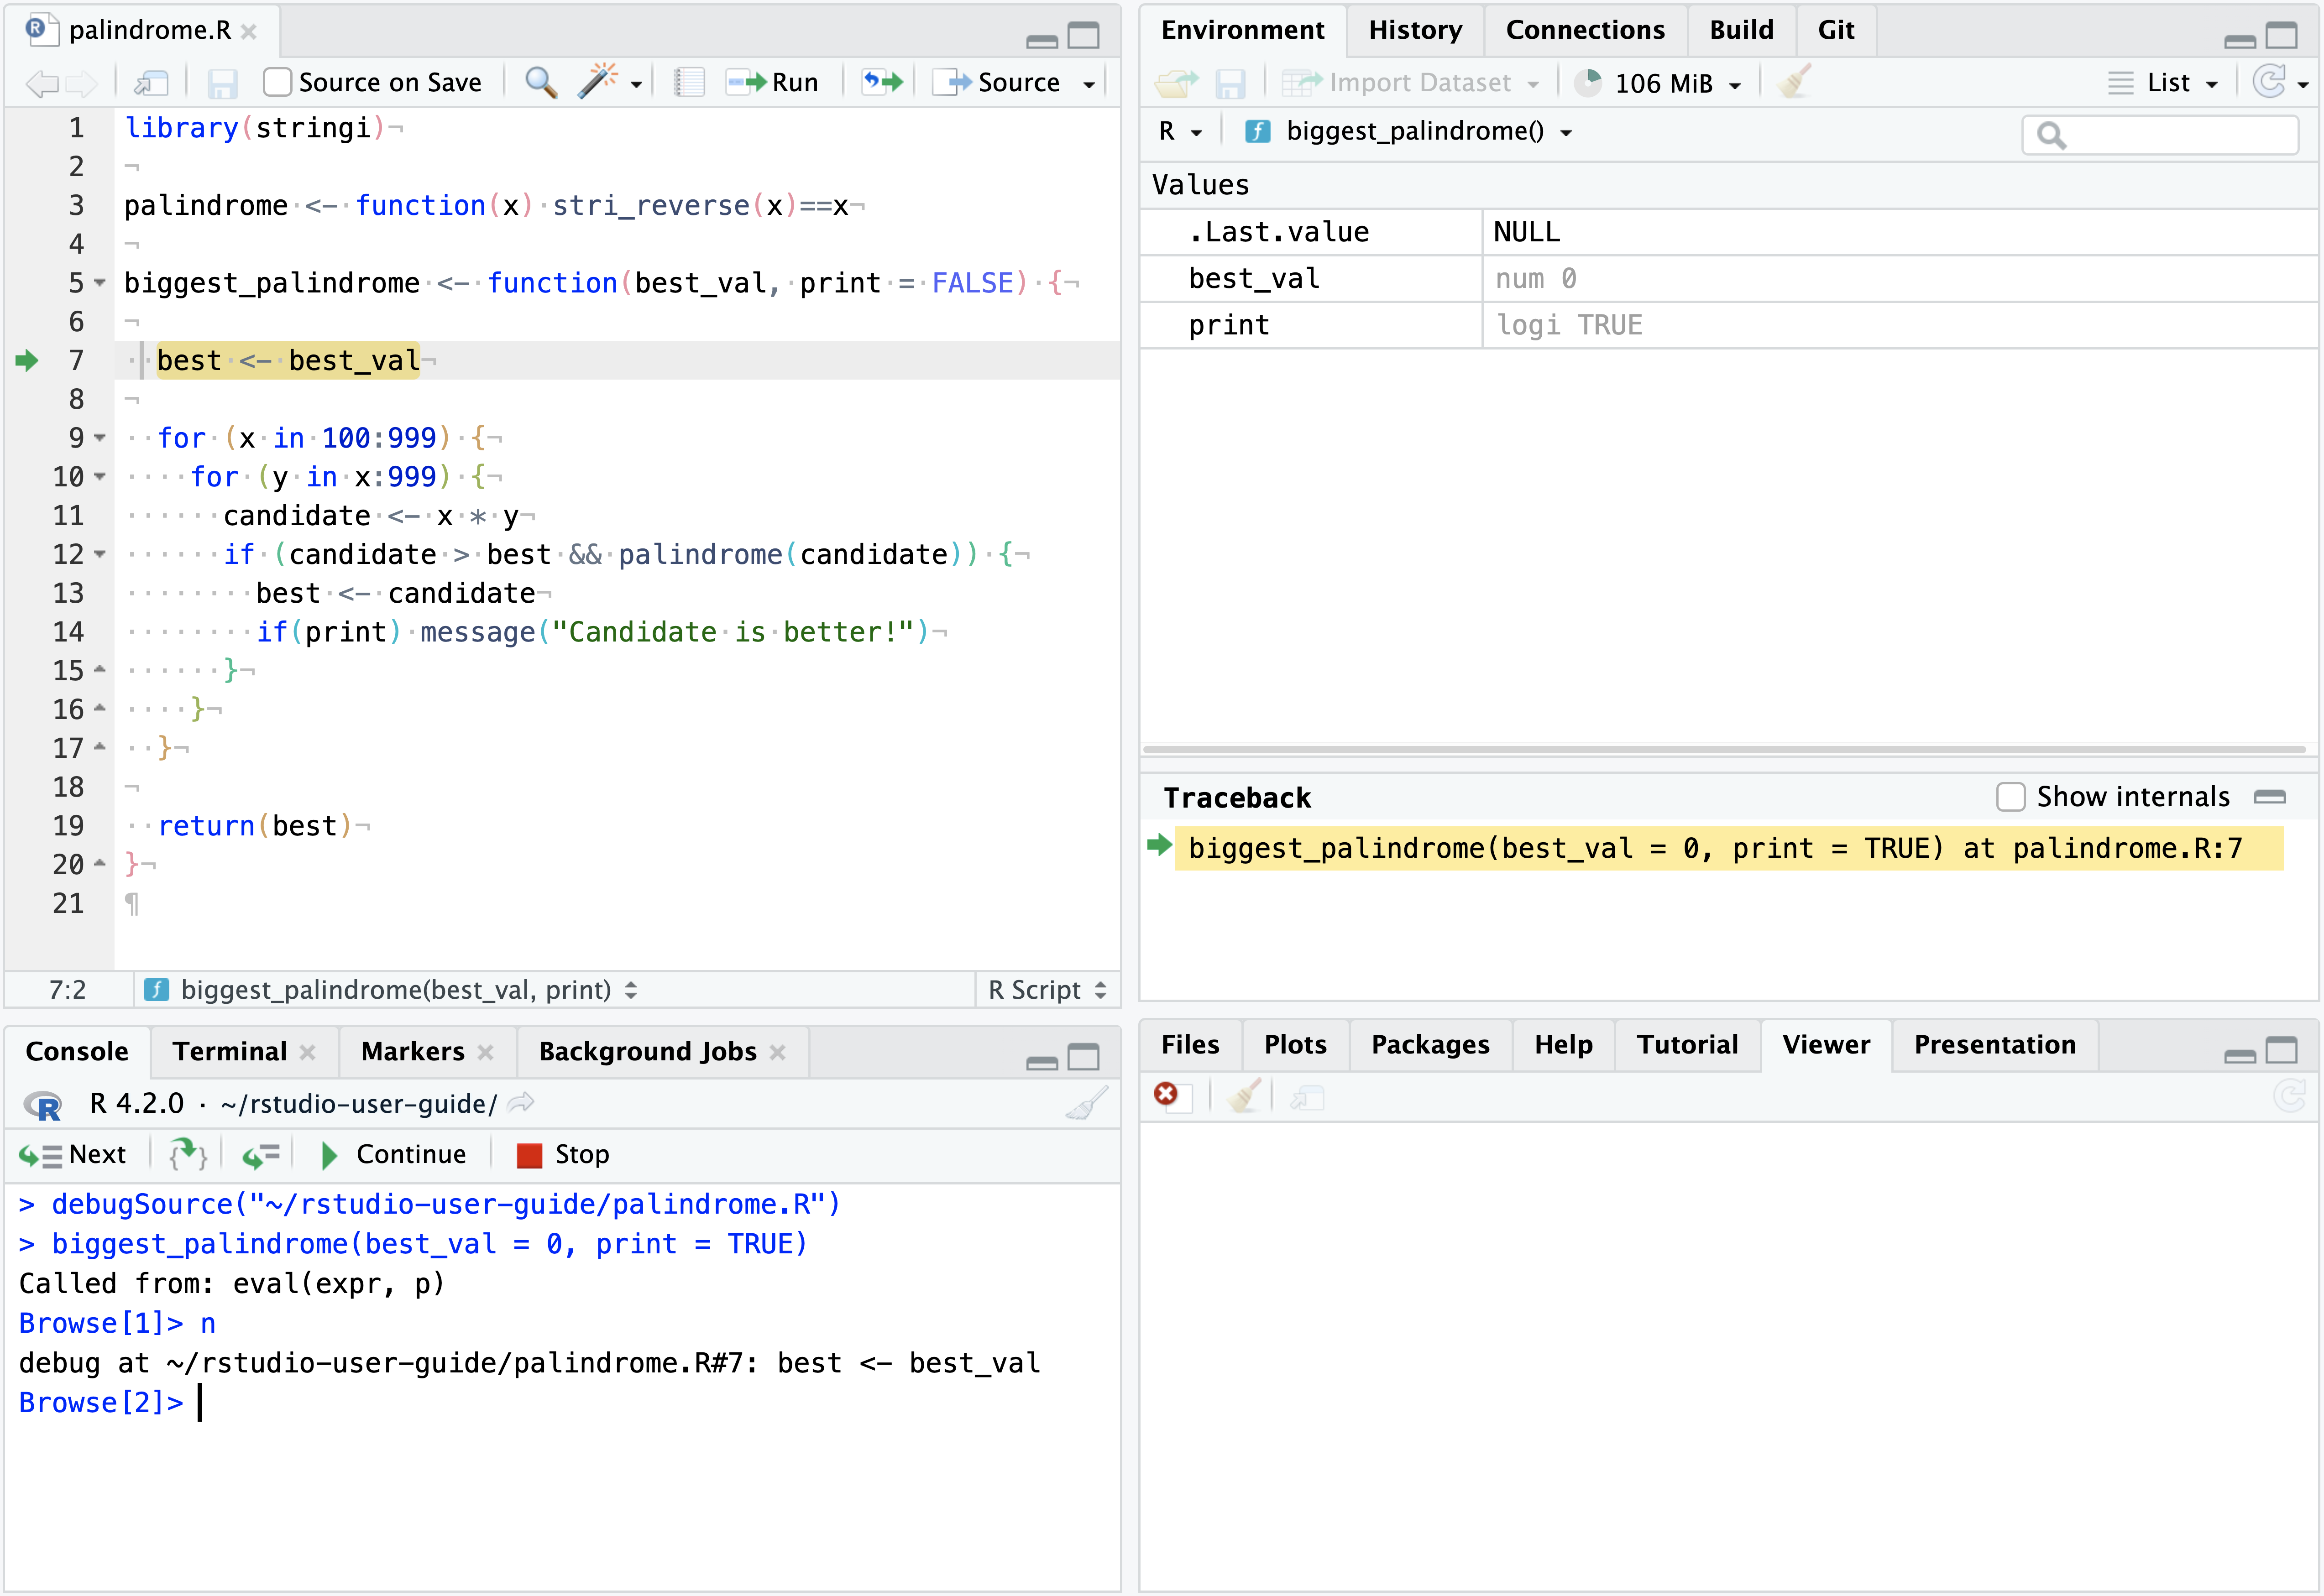 A screenshot of RStudio displaying example R code with a browser(), the R Console executing within the browser() context, the environment pane, and the traceback to the specific function with the browser.